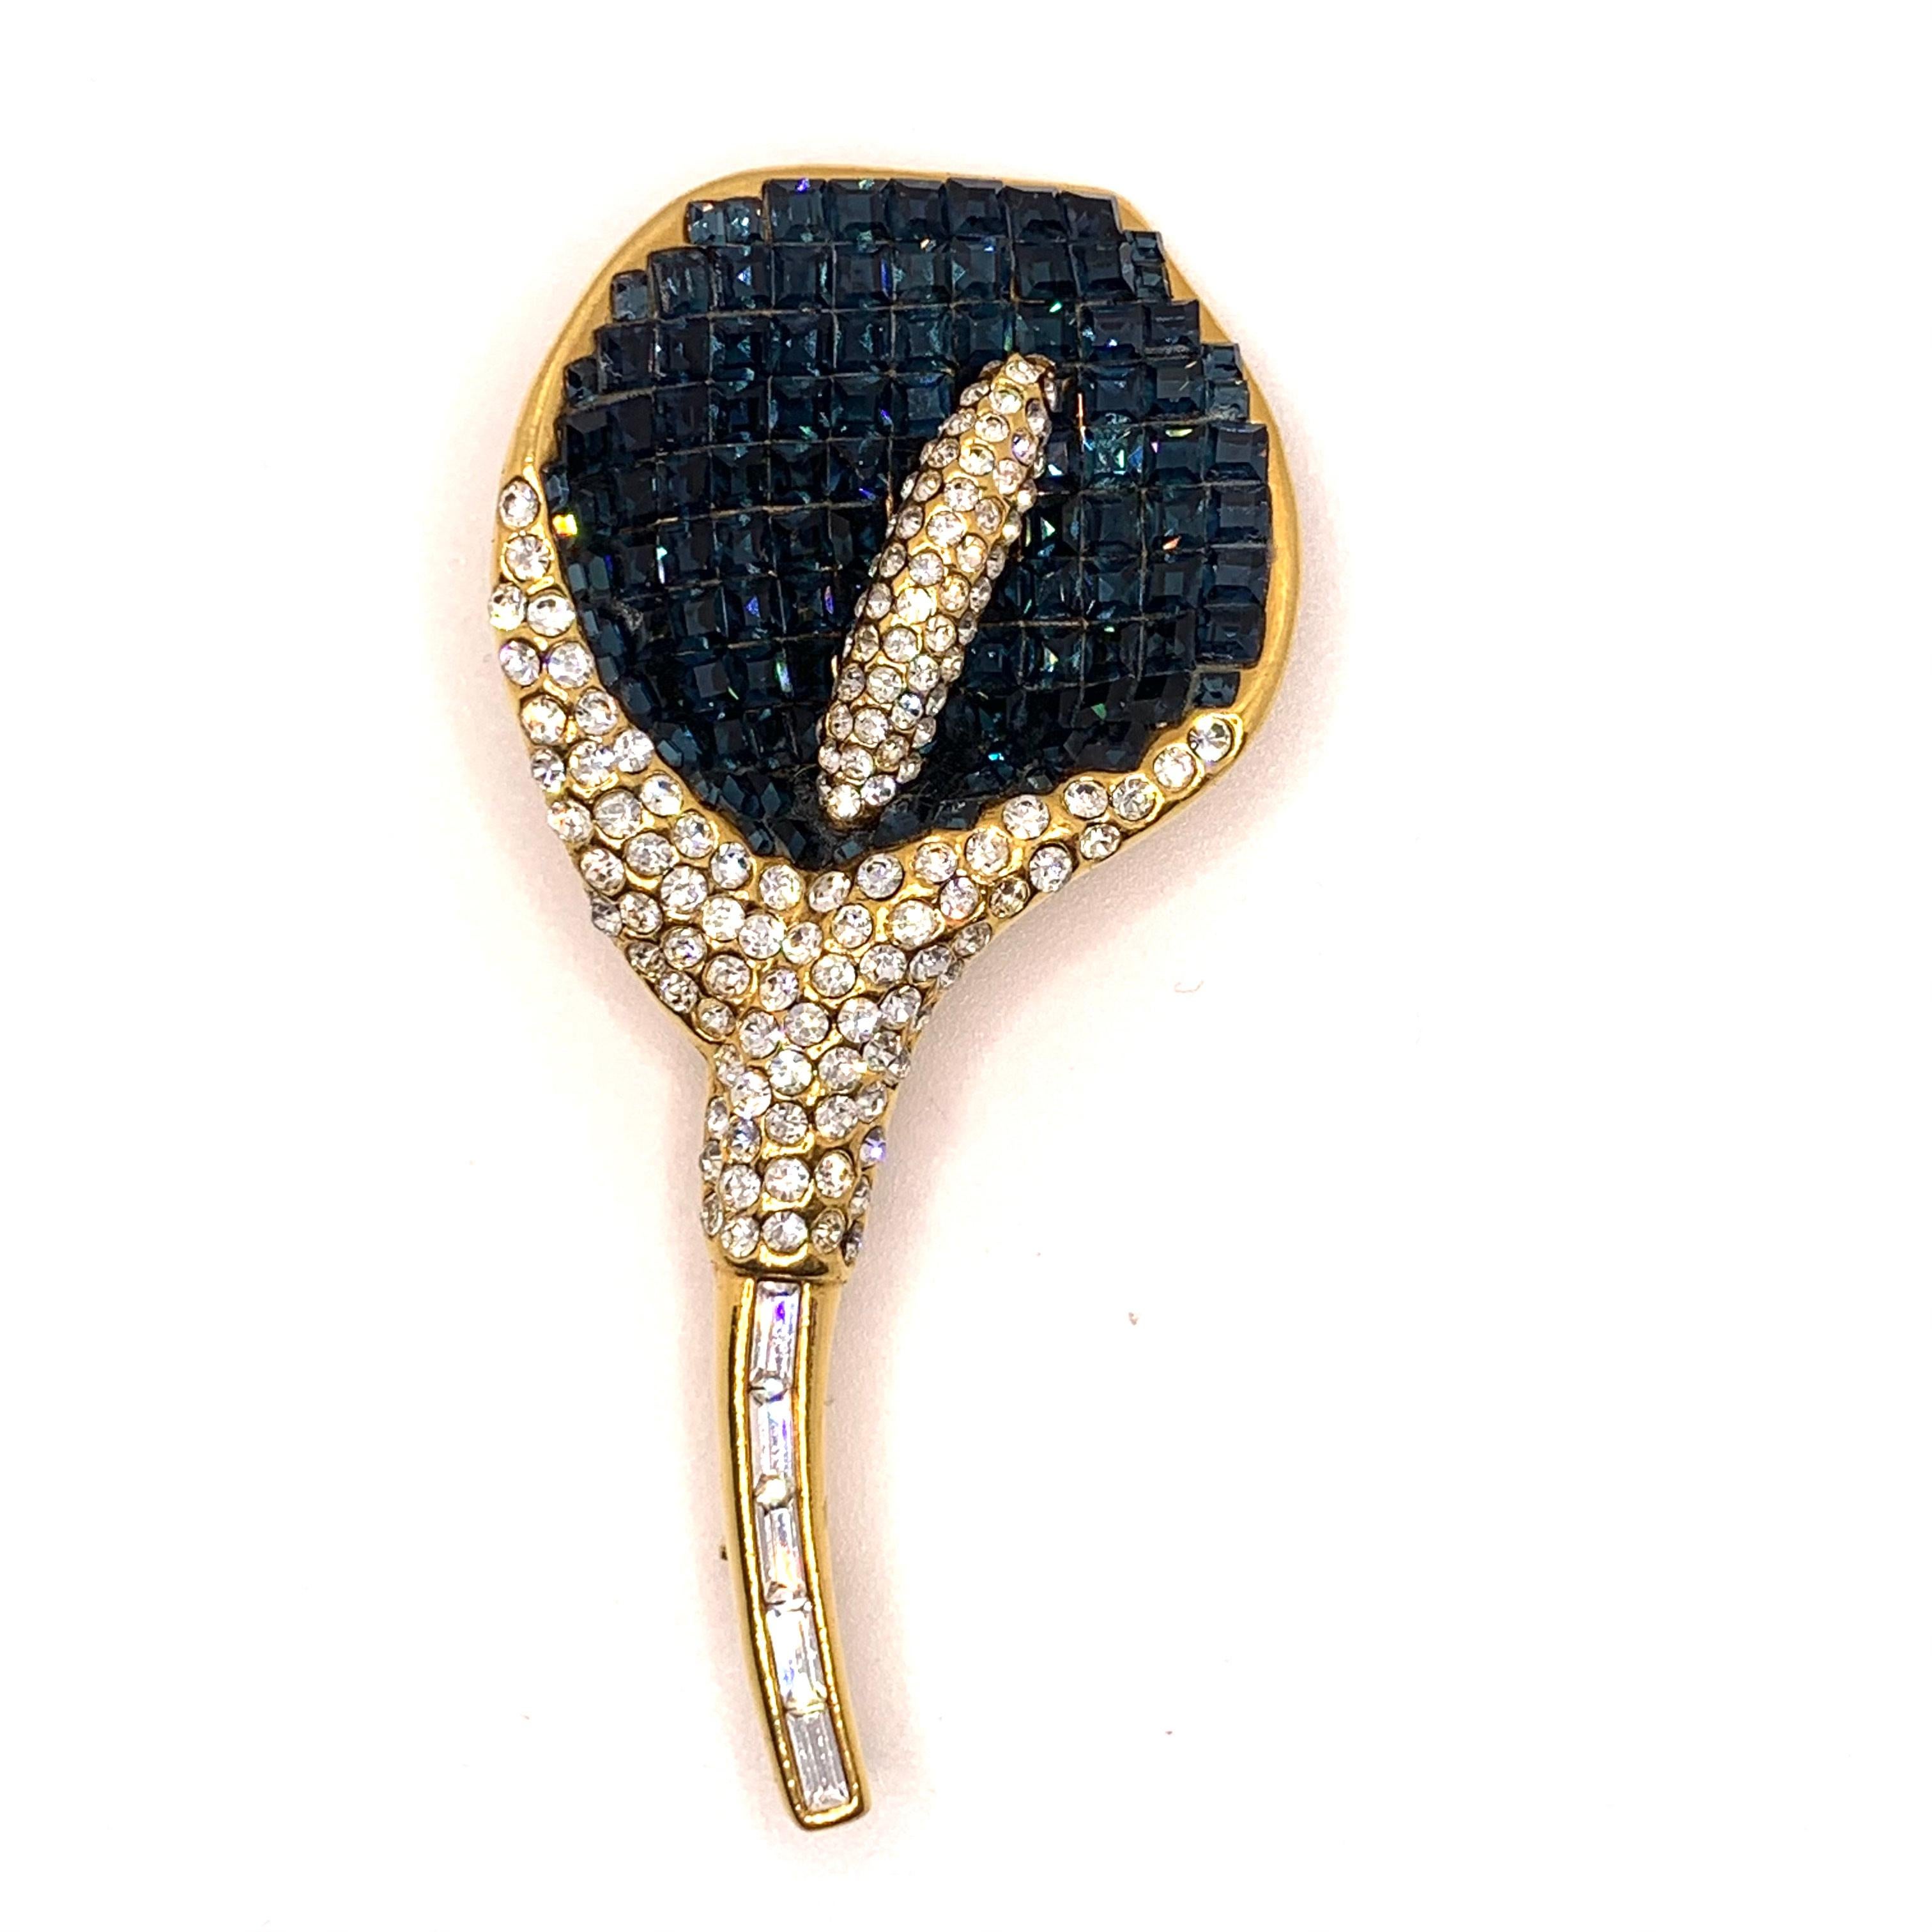 Classic Elegant Vintage Swarovski Clear Crystal Calla Lily Brooch

This vintage brooch features over 240 pieces of blue sapphire and white Swarovski crystals in yellow gold tone. Made in the USA by New York designer brand Jarin.  3